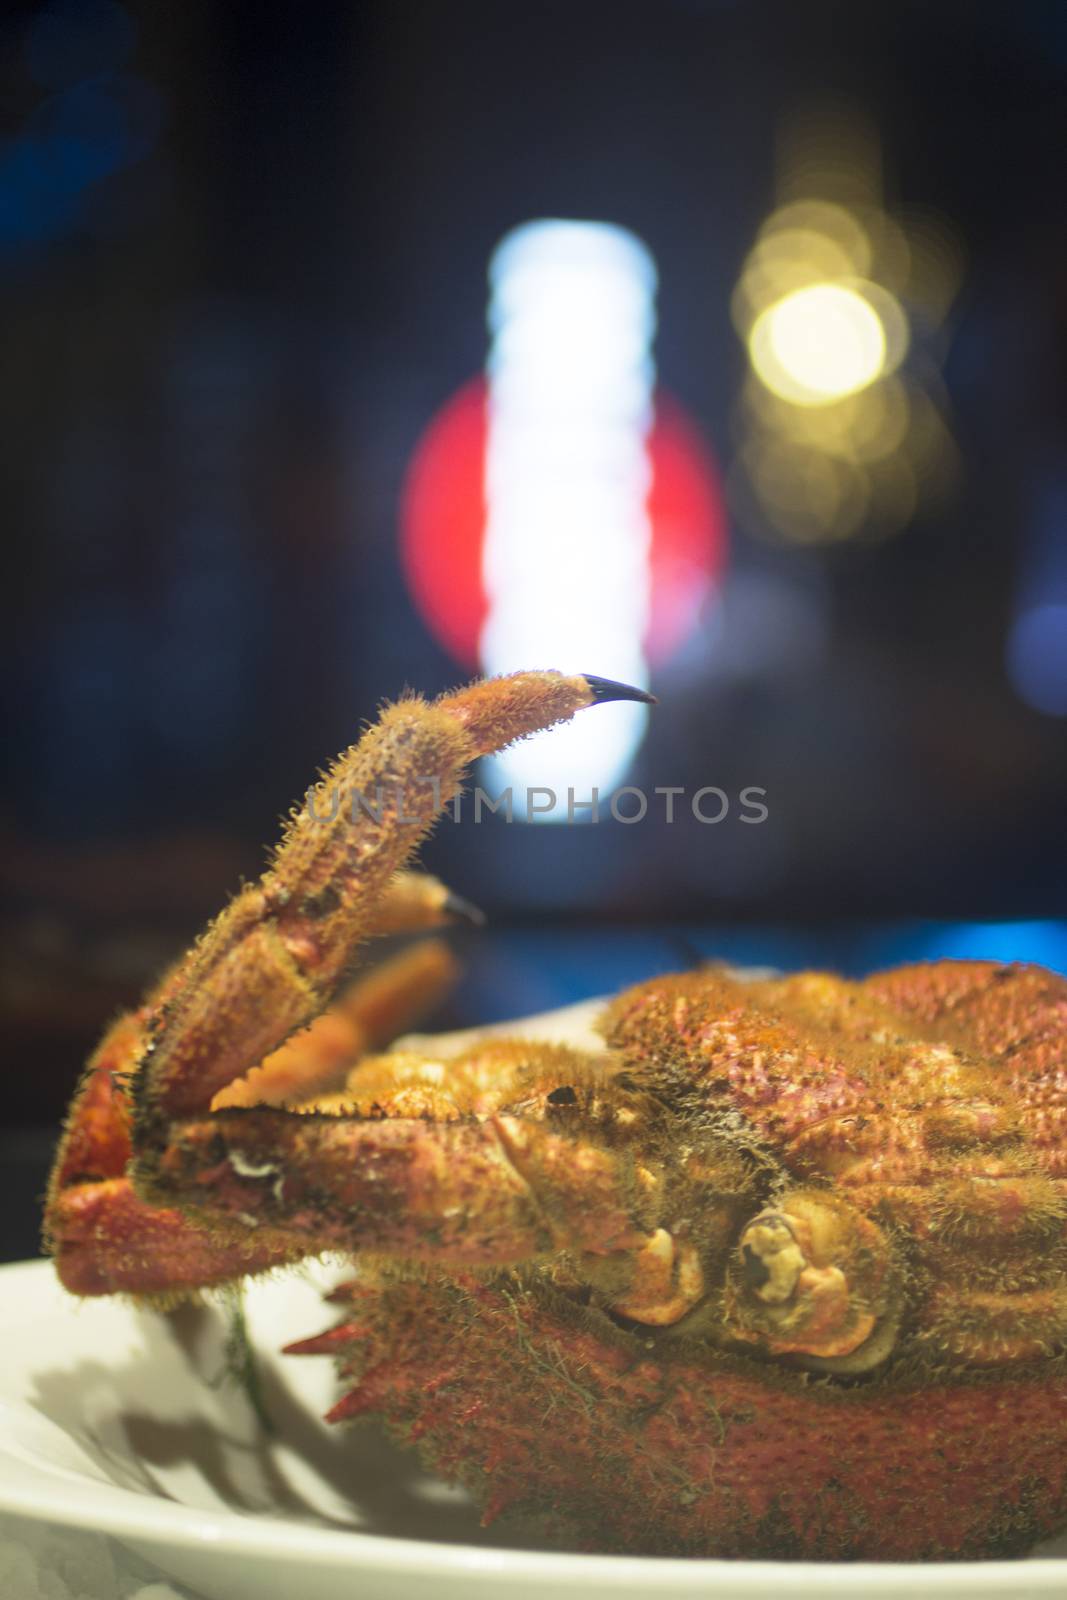 Crab in dish on ice in restaurant photo.